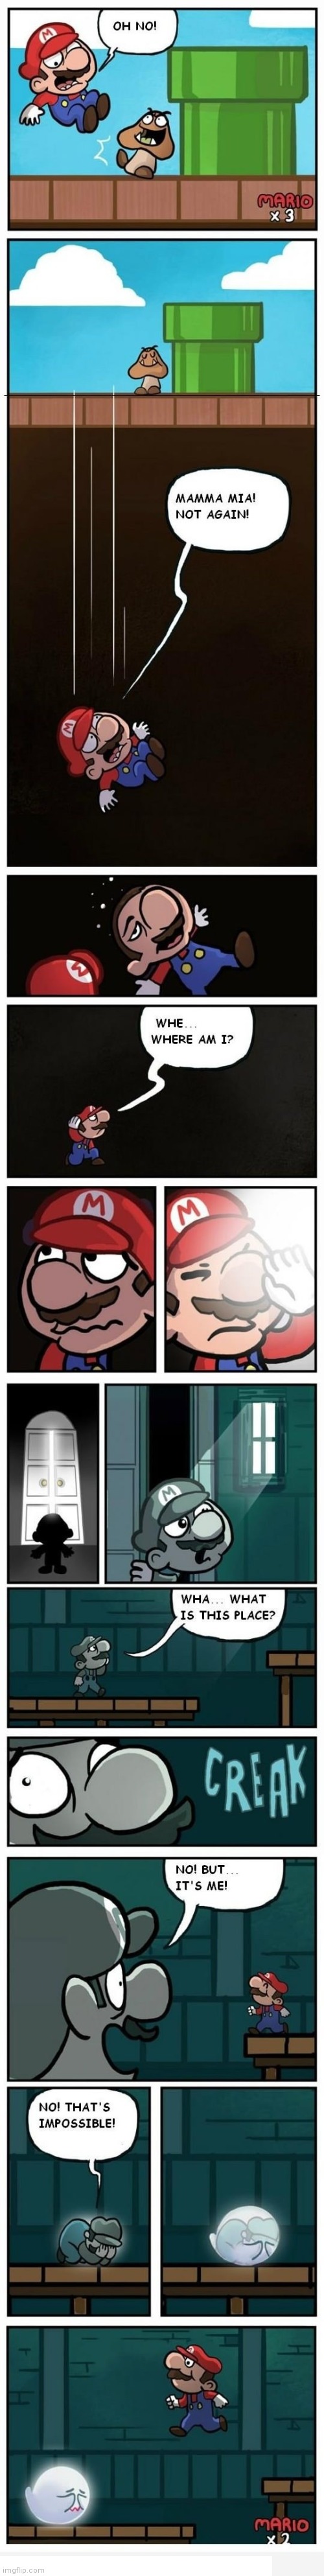 MARIO BECOMES A SPOOKY BOO | image tagged in super mario bros,boo,spooky,spooktober,comics/cartoons | made w/ Imgflip meme maker